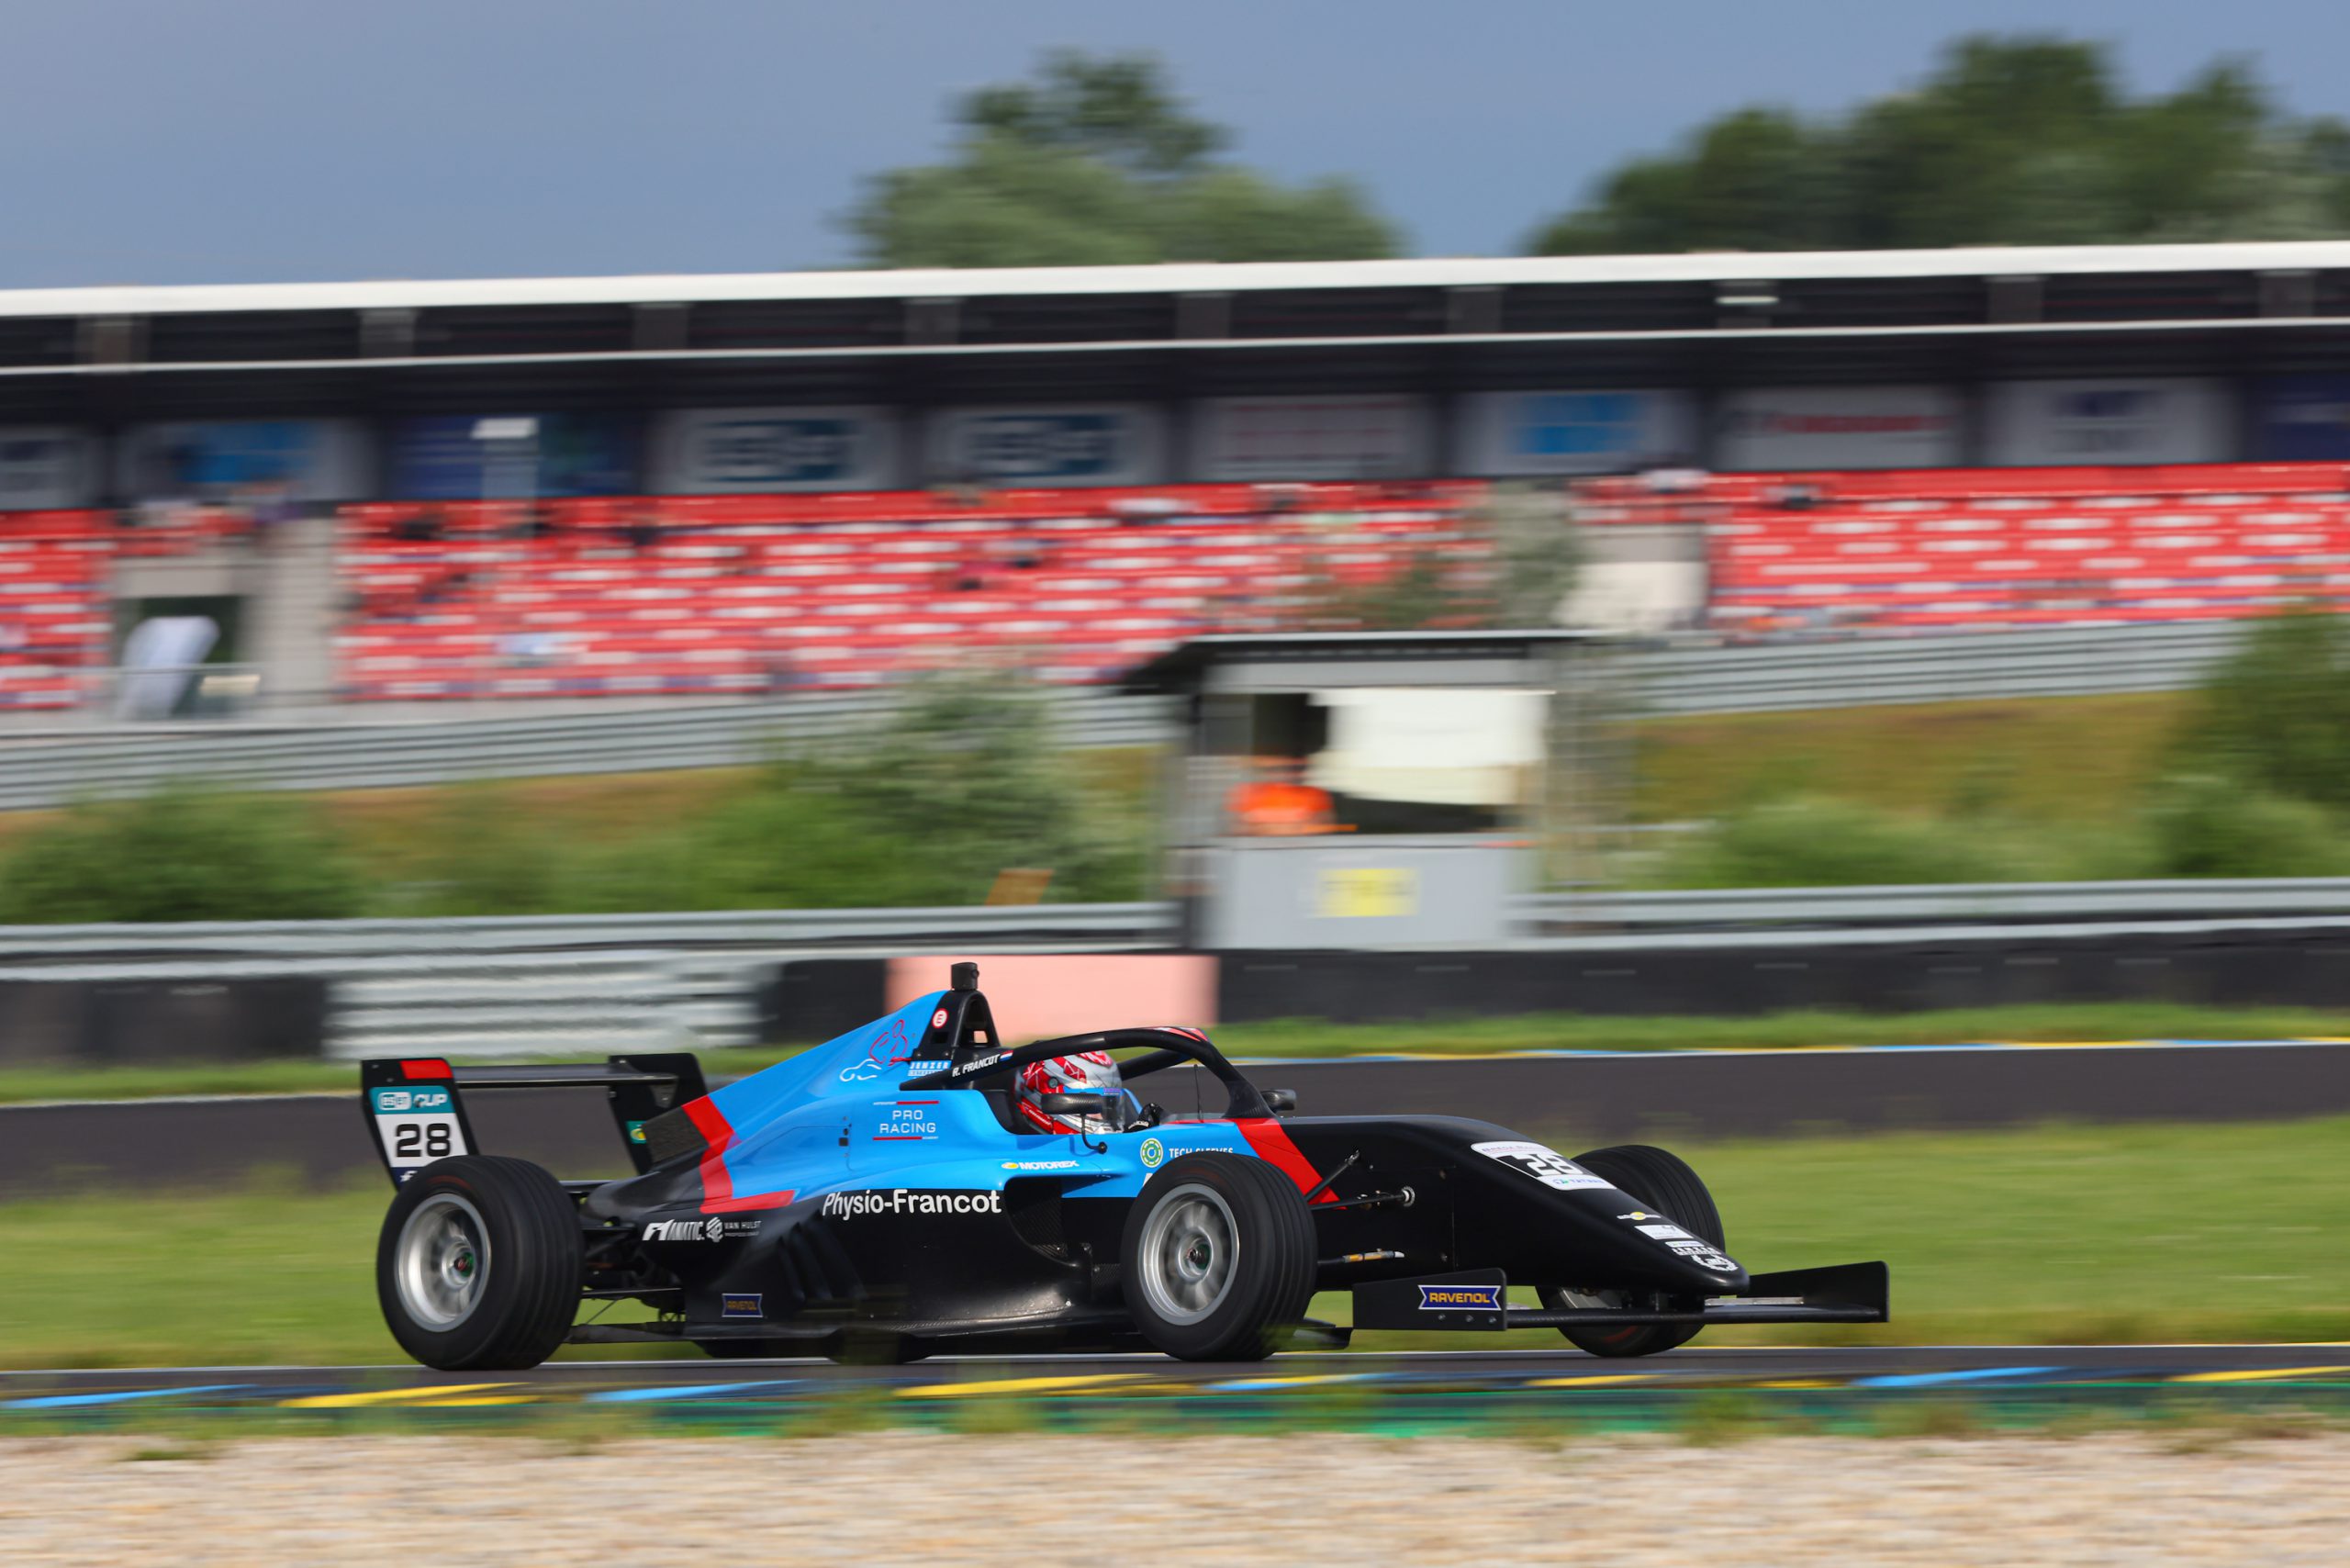 Reno Francot sets the fastest time among the Formula 4 field